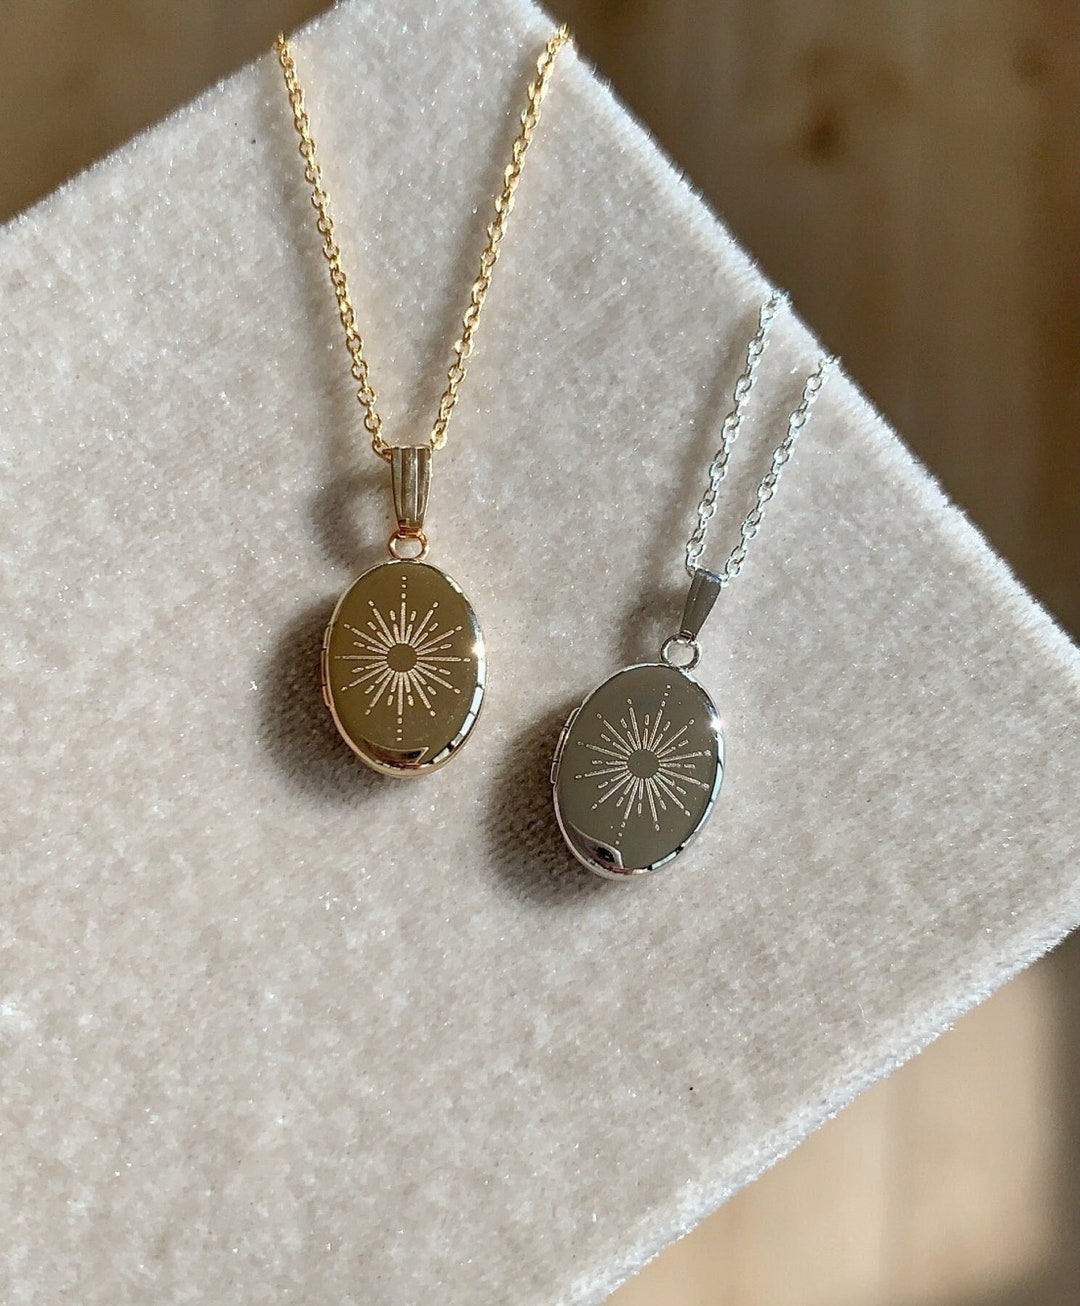 Sunshine Sun Oval Locket, Personalized Gifts, Engravable Necklace - Etsy